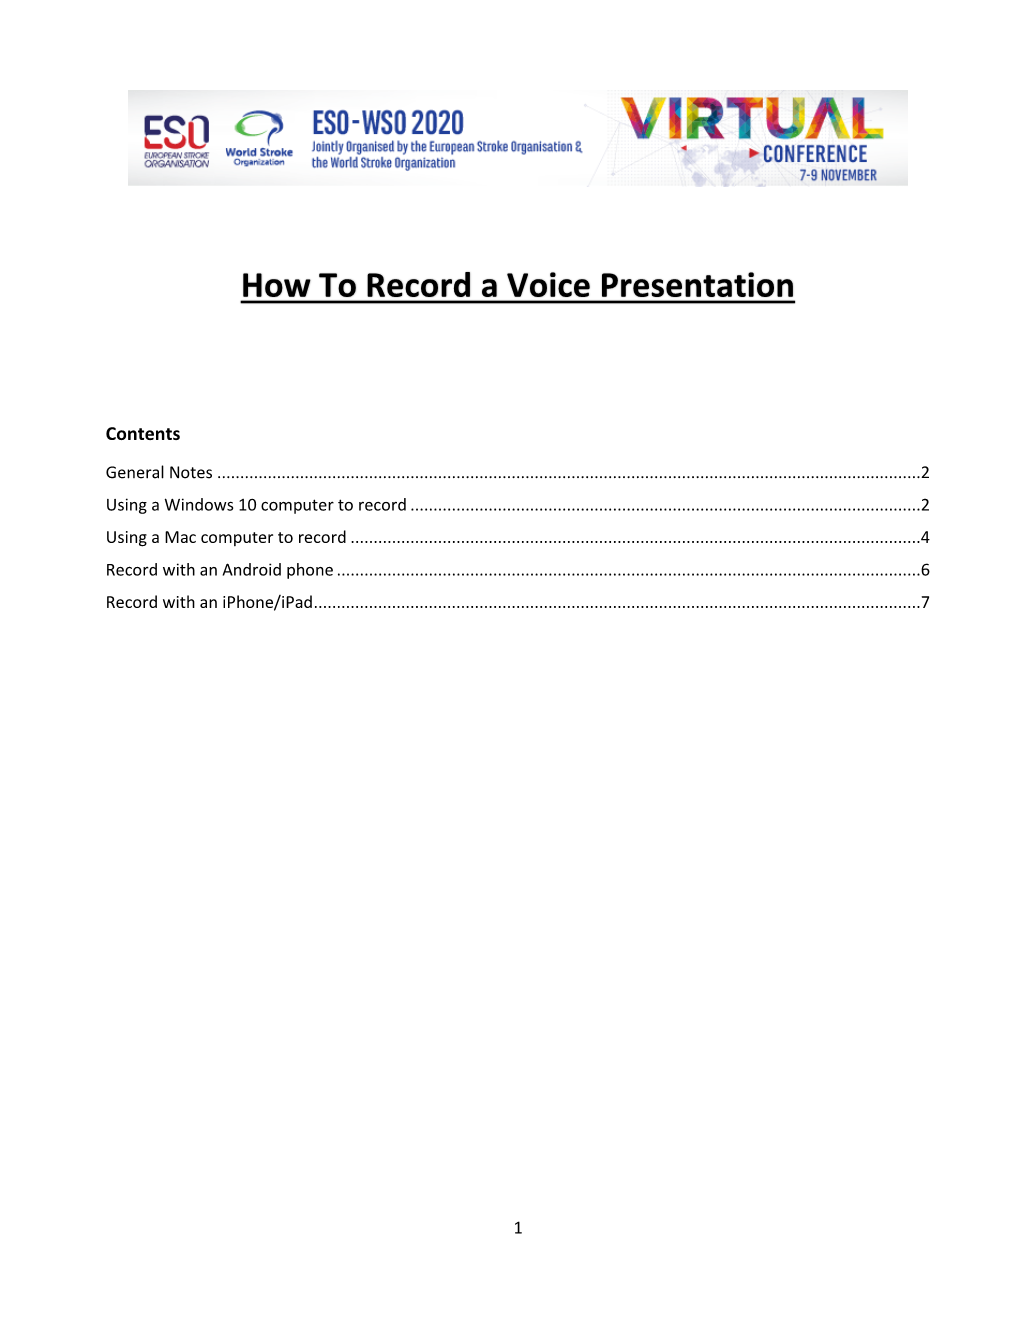 How to Record a Voice Presentation